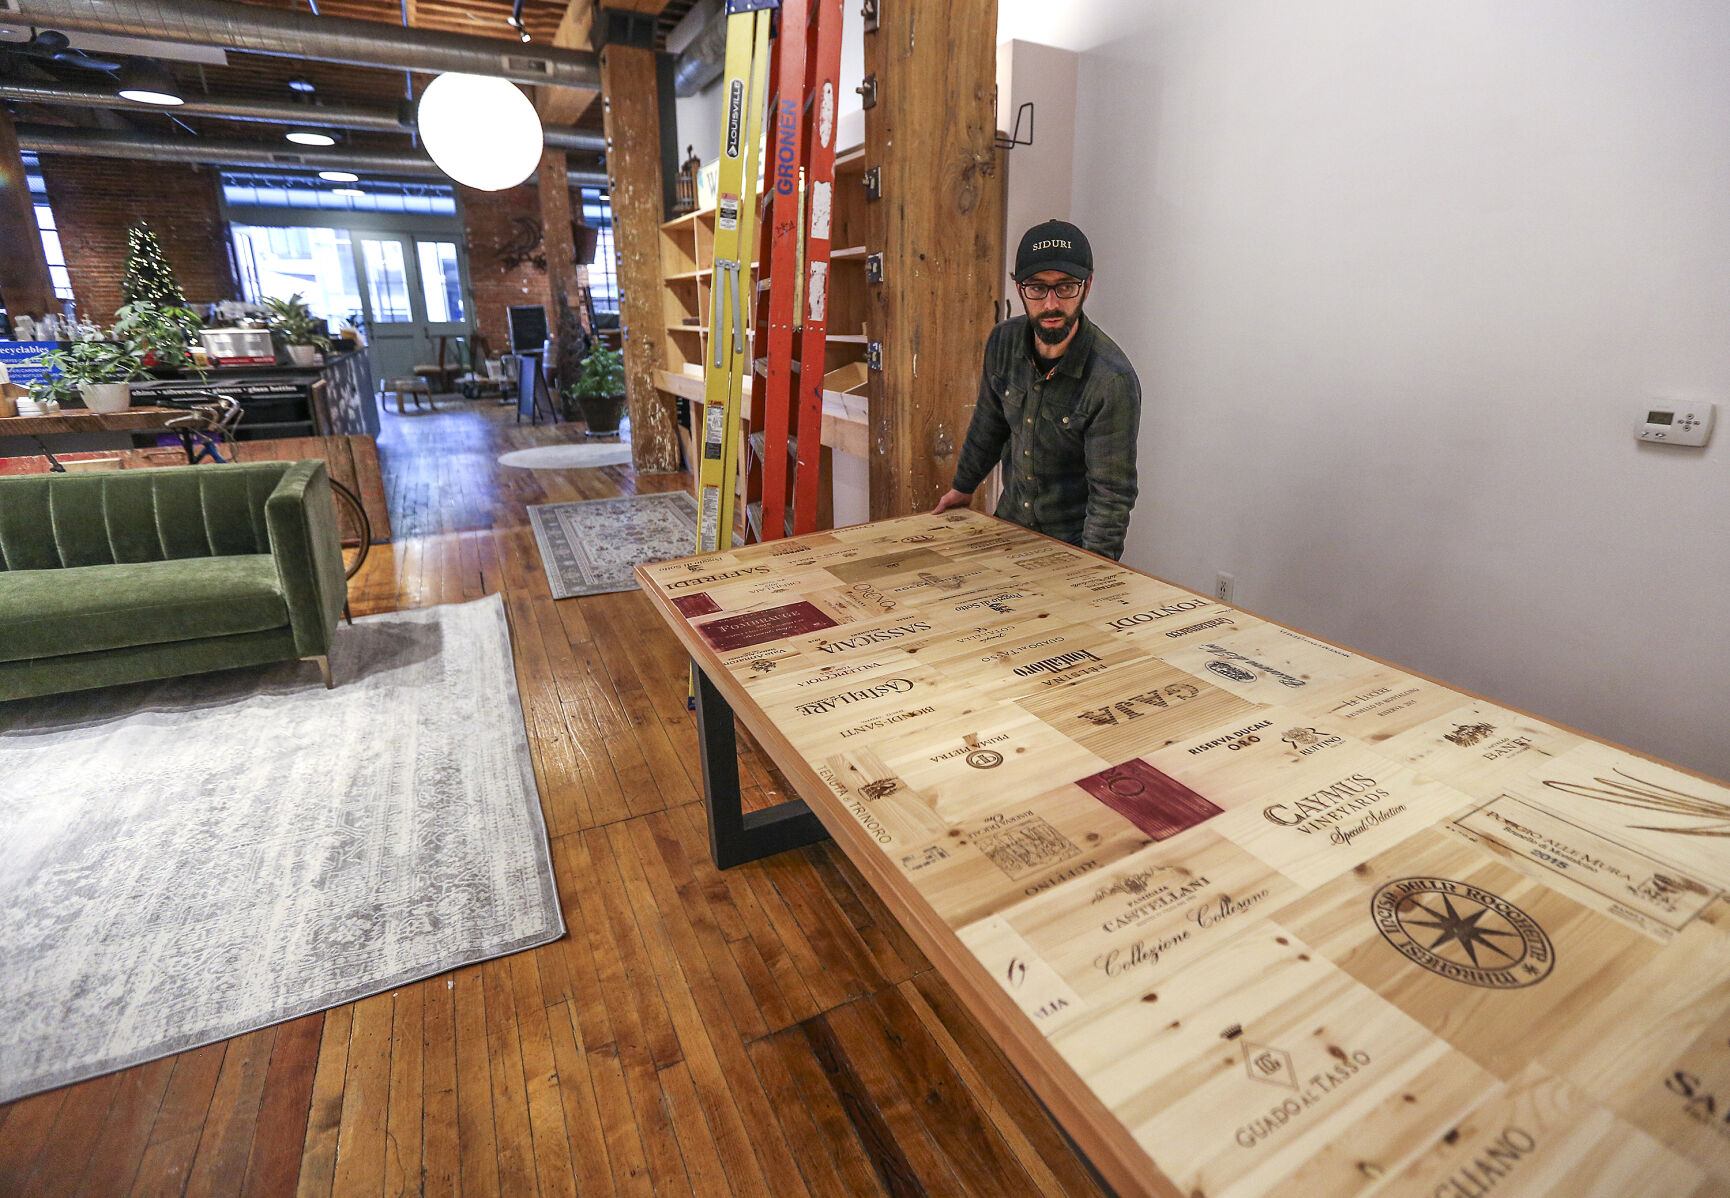 E.J. Droessler moves a custom made table into position while working on his new business, E.J.’s Wine Shop & Tasting Room located in the Millwork District in the space previously occupied by Inspire Cafe. The business will share space with Wayfarer Coffee.    PHOTO CREDIT: Dave Kettering